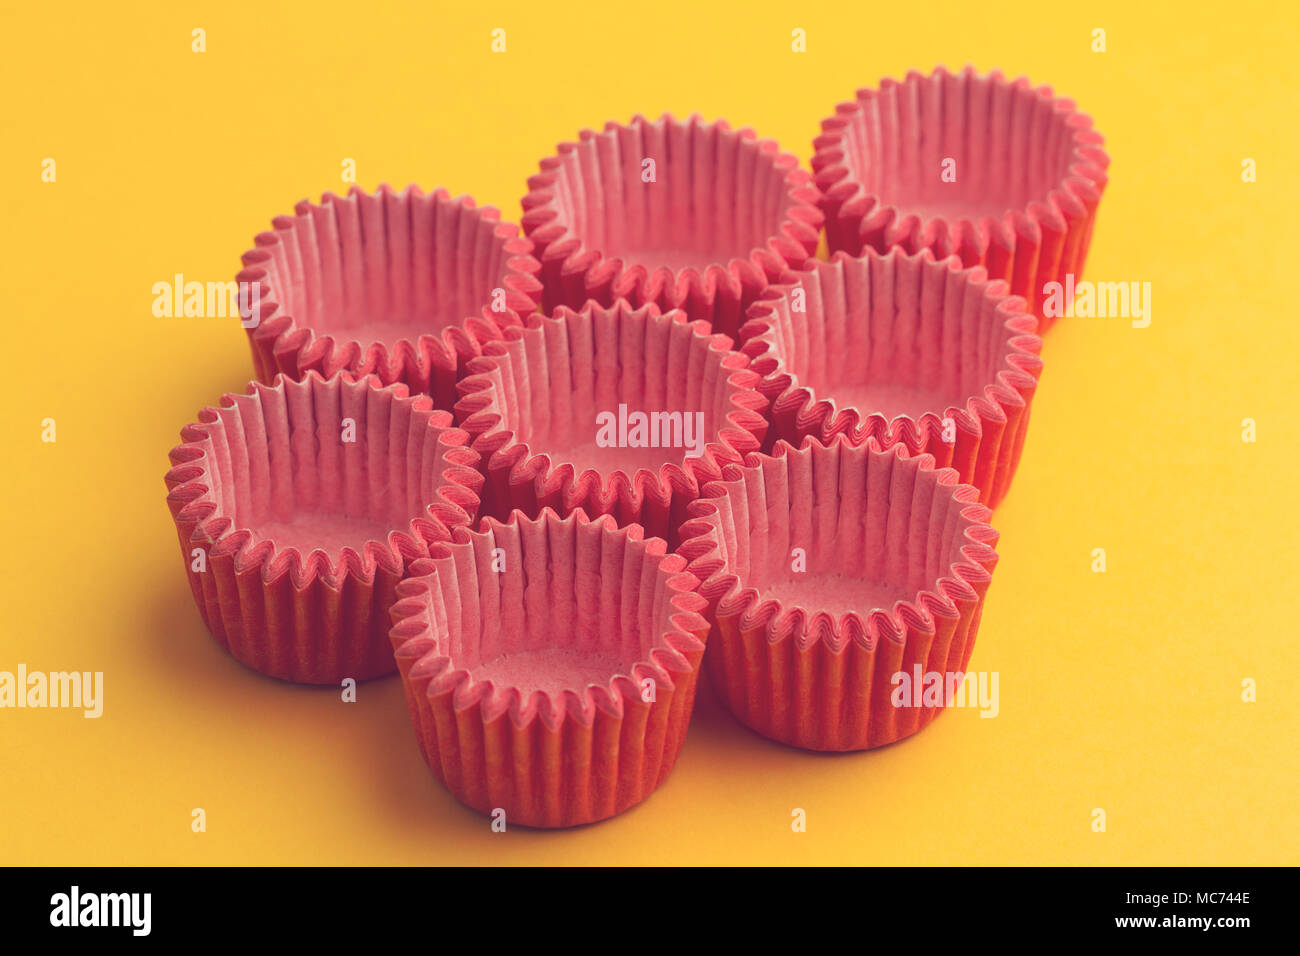 horizontal top view of arrangement of many pink small paper baking tray holders for cupcakes and muffin on yellow background Stock Photo